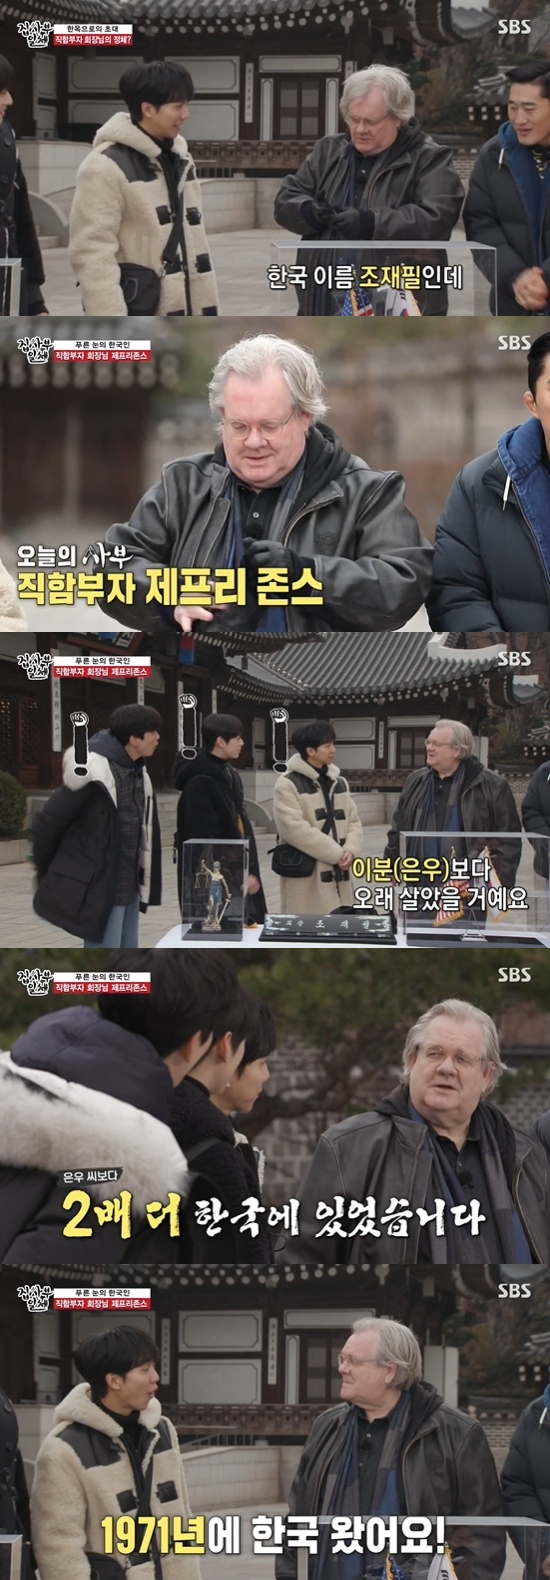 All The Butlers Jeffrey Quincy Jones has appeared as MasterOn SBS All The Butlers broadcast on the 17th, Jeffrey Quincy Jones came to Korea in 1971.On this day, the production team said, I often say that Korea is afraid.Shin Sung-rok, Lee Seung-gi, Jung Eun-woo, Kim Dong-Hyun and Yang Se-hyeong released three titles of master.He was the largest law firm lawyer in Korea, a nonprofit welfare organization foundation, and chairman of the US Chamber of Commerce in Korea.The masters name was jo jae-pil, which appeared on a motorcycle - but the members who saw the master were embarrassed.Jeffrey Quincy Jones introduced himself as the Korean name is jo jae-pil, in fact Jeffrey Quincy Jones.Jeffrey Quincy Jones, who saw Shin Sung-rok, said, Kairos, its cool, Shin Sung-rok said.When Cha Jung Eun-woo asked, How many years have you been in Korea? Jeffrey Quincy Jones said, I would have lived longer than Jung Eun-woo. I lived twice as much.I came in 71. Jung Eun-woo was surprised that my mother came before she was born.Photo = SBS Broadcasting Screen